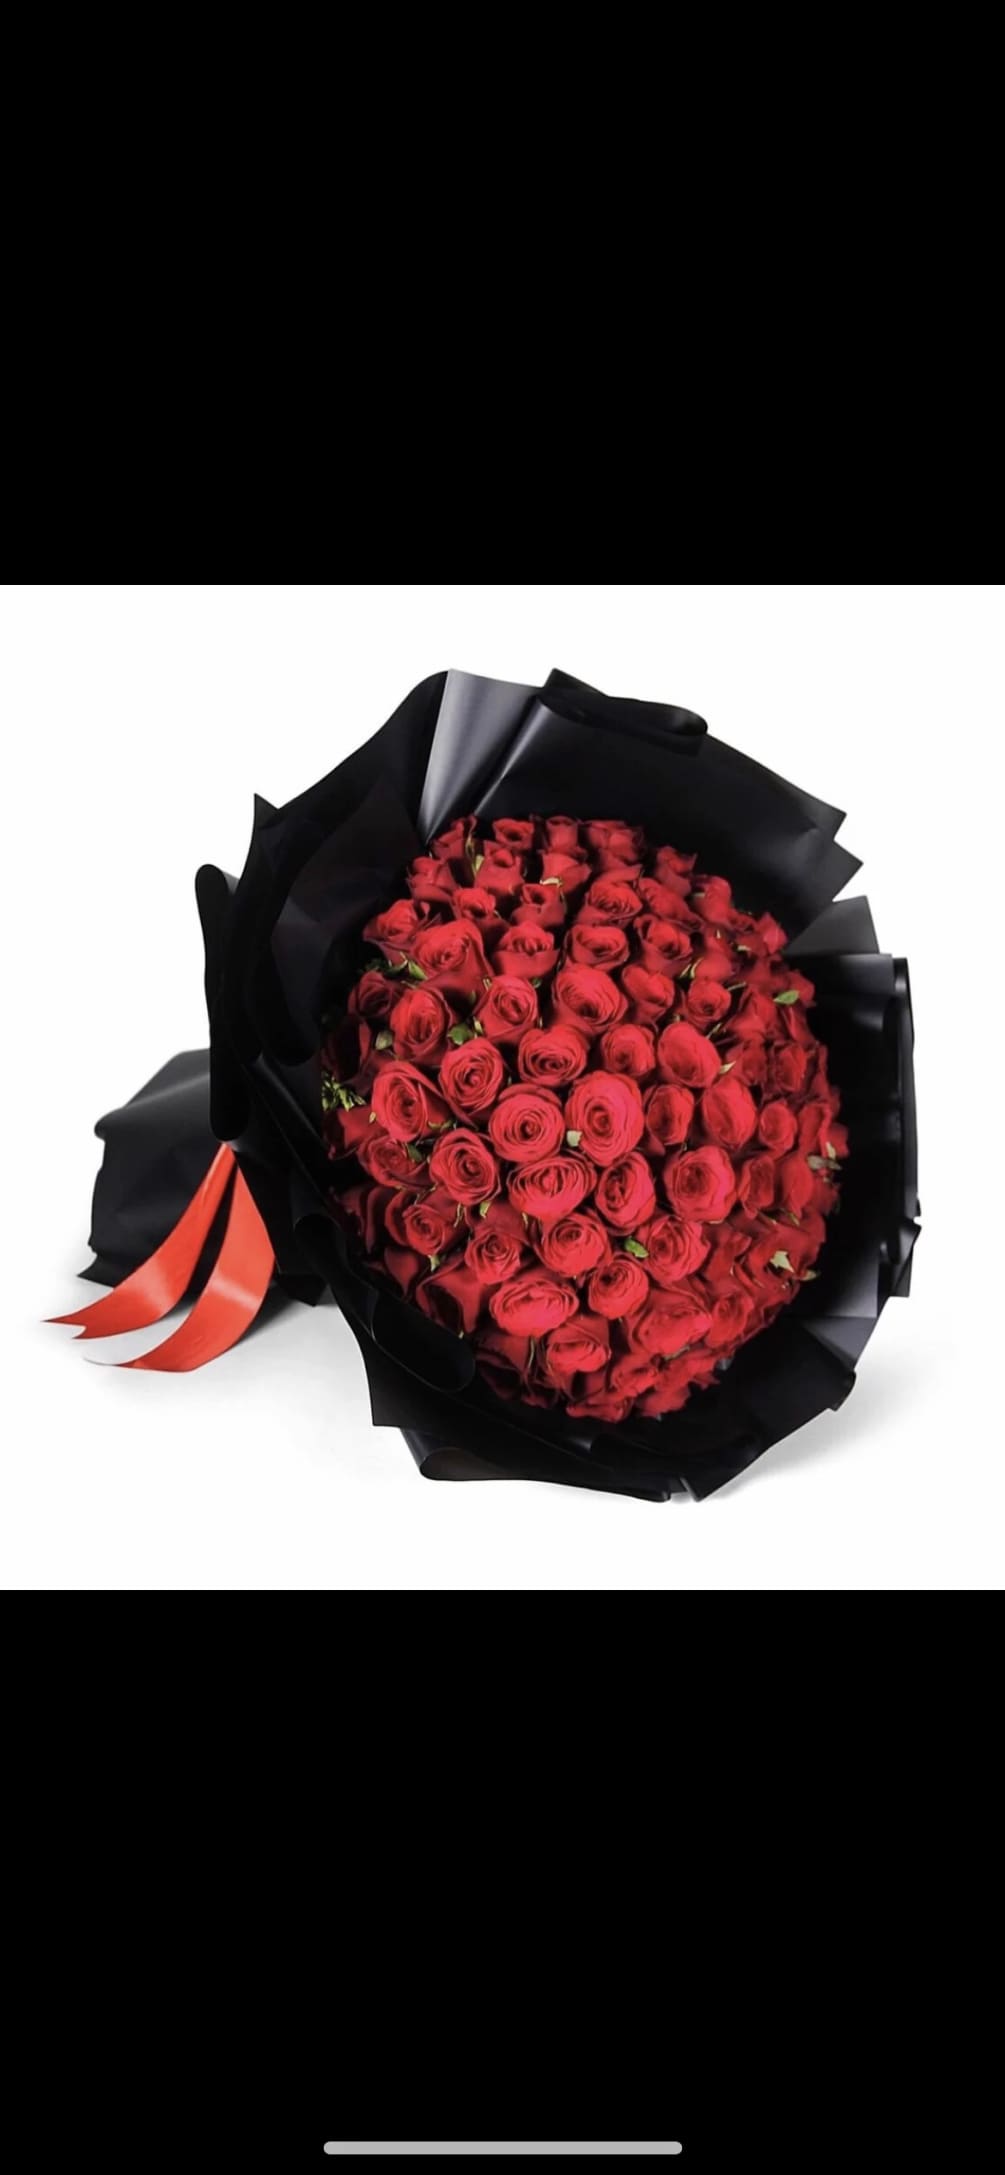 100 roses wrapped in our classic sexy black papers with large red